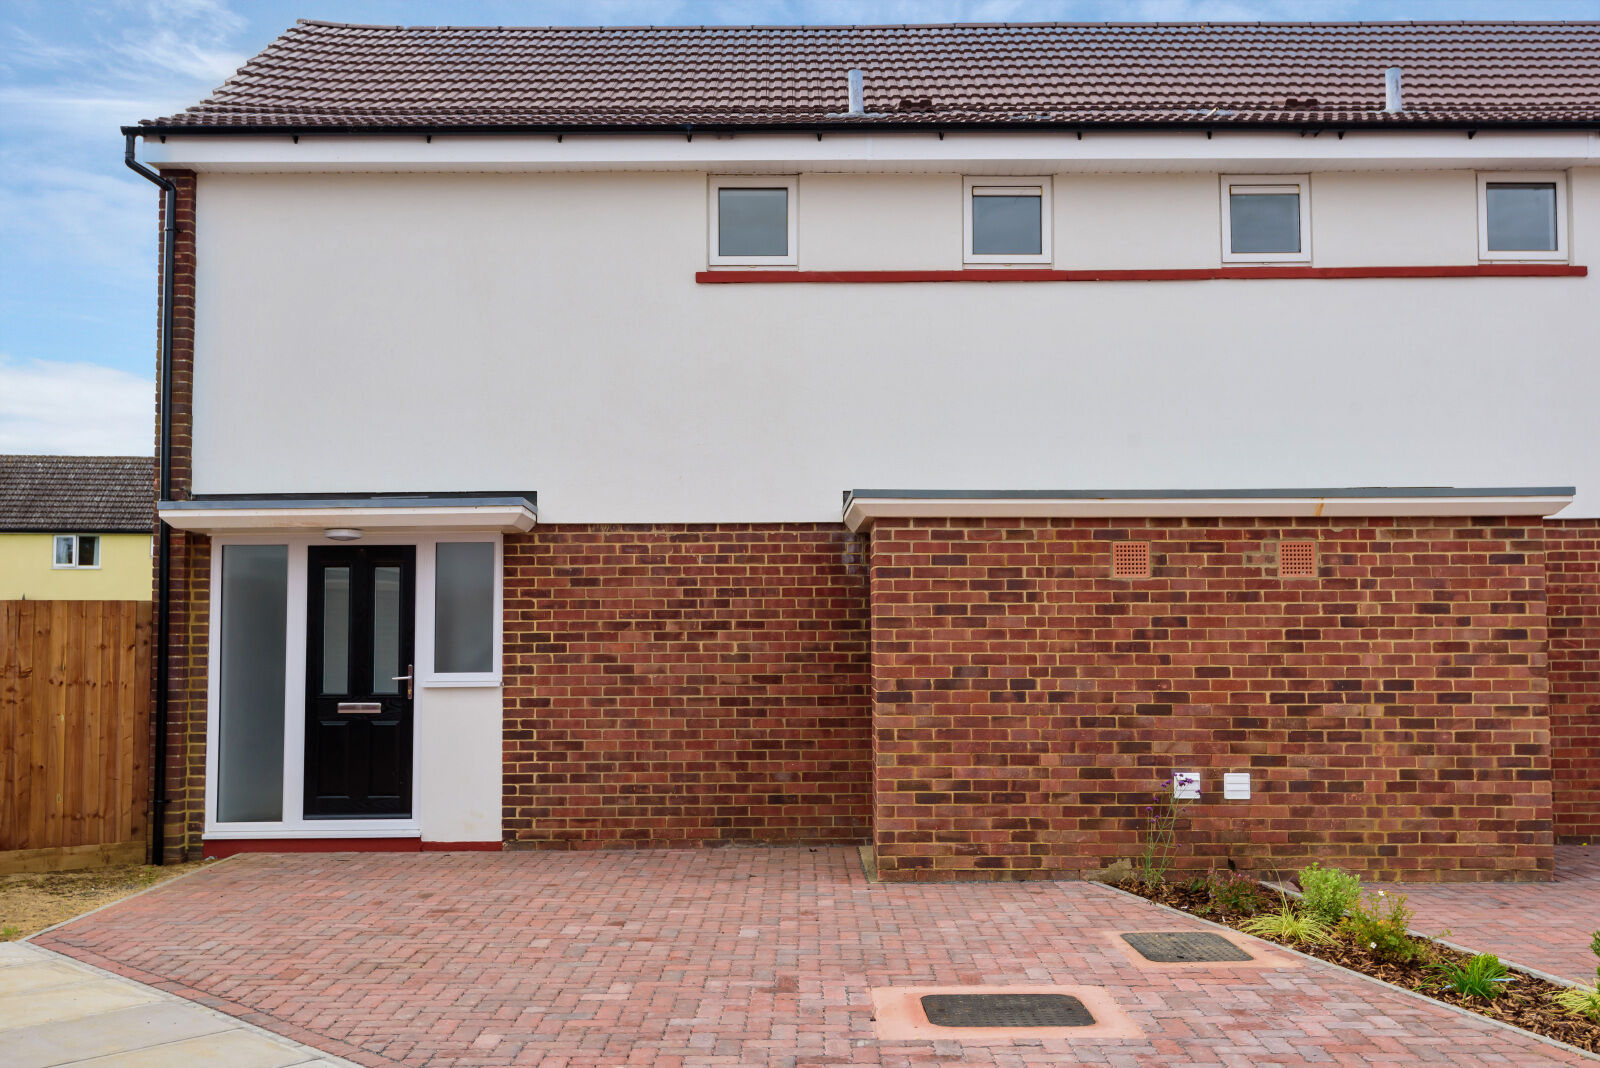 2 bedroom end terraced house for sale Spey Road, Shippon, OX13, main image